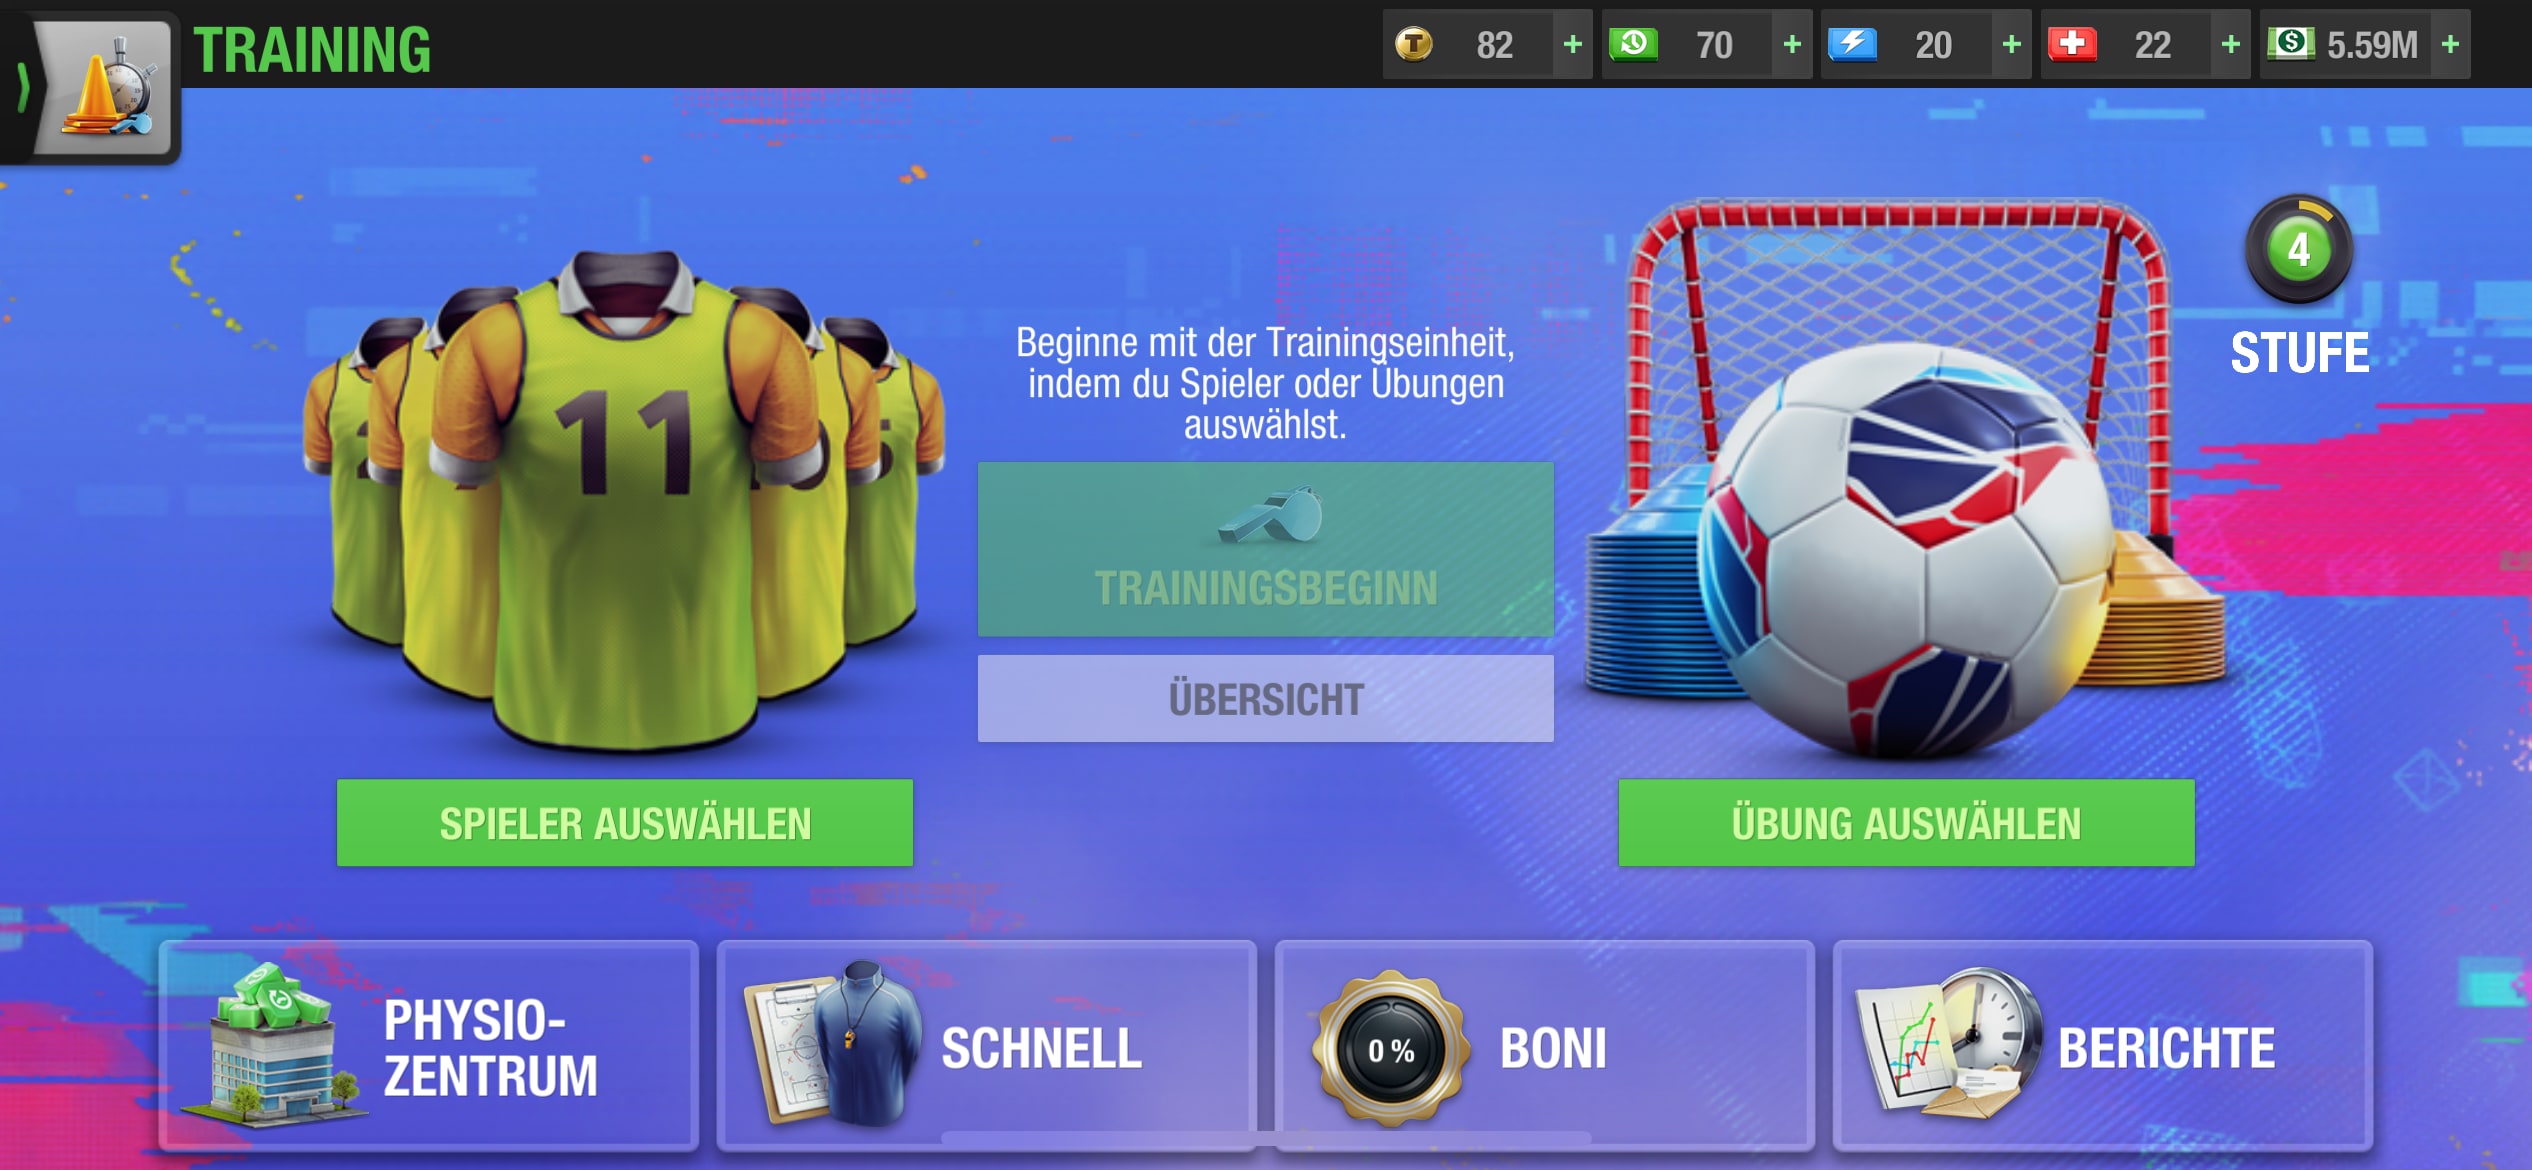 Top Eleven Football Manager 11 geniale Tipps!